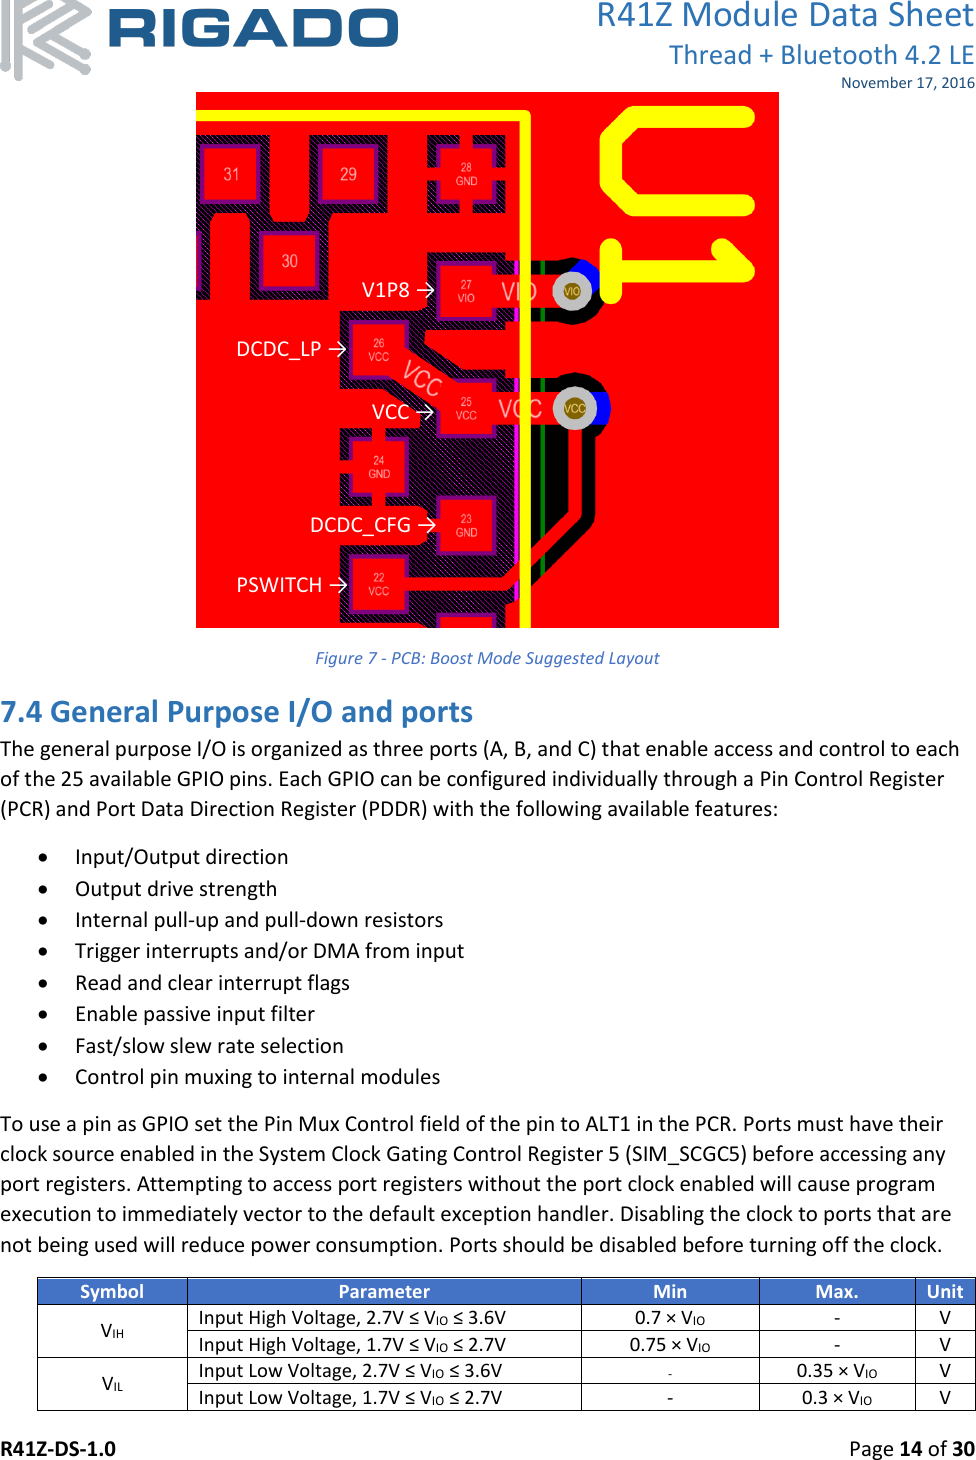 R41Z Module Data Sheet Thread + Bluetooth 4.2 LE November 17, 2016 R41Z-DS-1.0    Page 14 of 30   Figure 7 - PCB: Boost Mode Suggested Layout 7.4 General Purpose I/O and ports The general purpose I/O is organized as three ports (A, B, and C) that enable access and control to each of the 25 available GPIO pins. Each GPIO can be configured individually through a Pin Control Register (PCR) and Port Data Direction Register (PDDR) with the following available features:  Input/Output direction  Output drive strength  Internal pull-up and pull-down resistors  Trigger interrupts and/or DMA from input  Read and clear interrupt flags  Enable passive input filter  Fast/slow slew rate selection  Control pin muxing to internal modules To use a pin as GPIO set the Pin Mux Control field of the pin to ALT1 in the PCR. Ports must have their clock source enabled in the System Clock Gating Control Register 5 (SIM_SCGC5) before accessing any port registers. Attempting to access port registers without the port clock enabled will cause program execution to immediately vector to the default exception handler. Disabling the clock to ports that are not being used will reduce power consumption. Ports should be disabled before turning off the clock. Symbol Parameter Min Max. Unit VIH Input High Voltage, 2.7V ≤ VIO ≤ 3.6V 0.7 × VIO - V Input High Voltage, 1.7V ≤ VIO ≤ 2.7V 0.75 × VIO - V VIL Input Low Voltage, 2.7V ≤ VIO ≤ 3.6V - 0.35 × VIO V Input Low Voltage, 1.7V ≤ VIO ≤ 2.7V - 0.3 × VIO V DCDC_LP → VCC → PSWITCH → DCDC_CFG → V1P8 → 